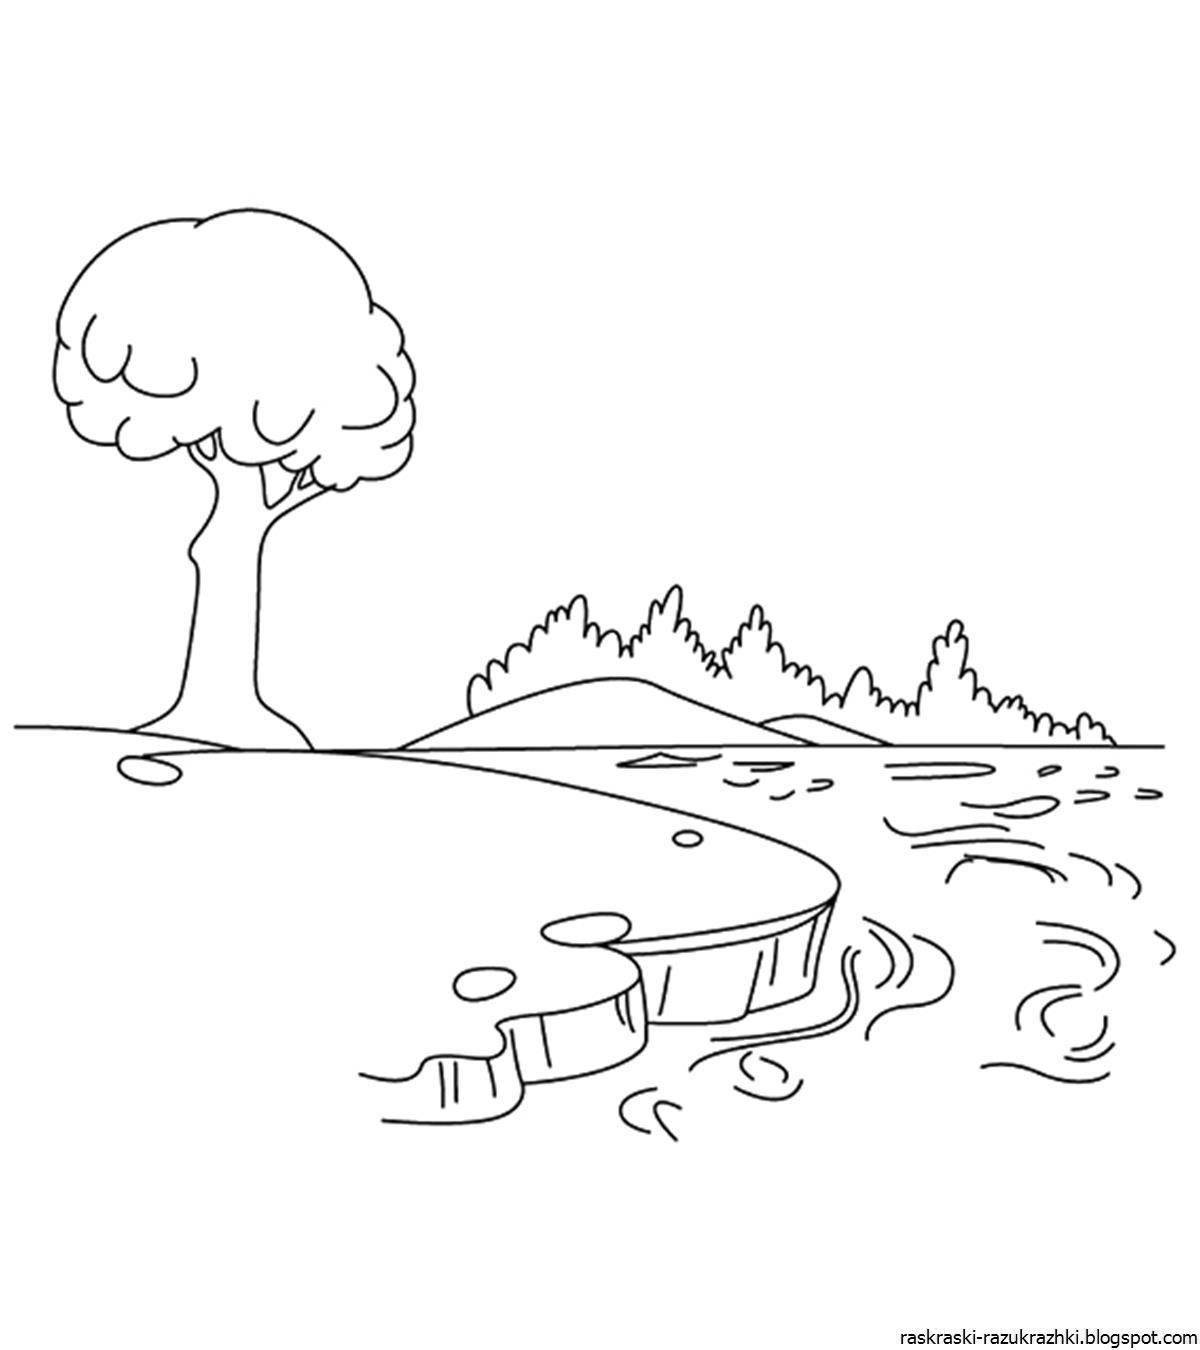 Awesome lake coloring pages for kids